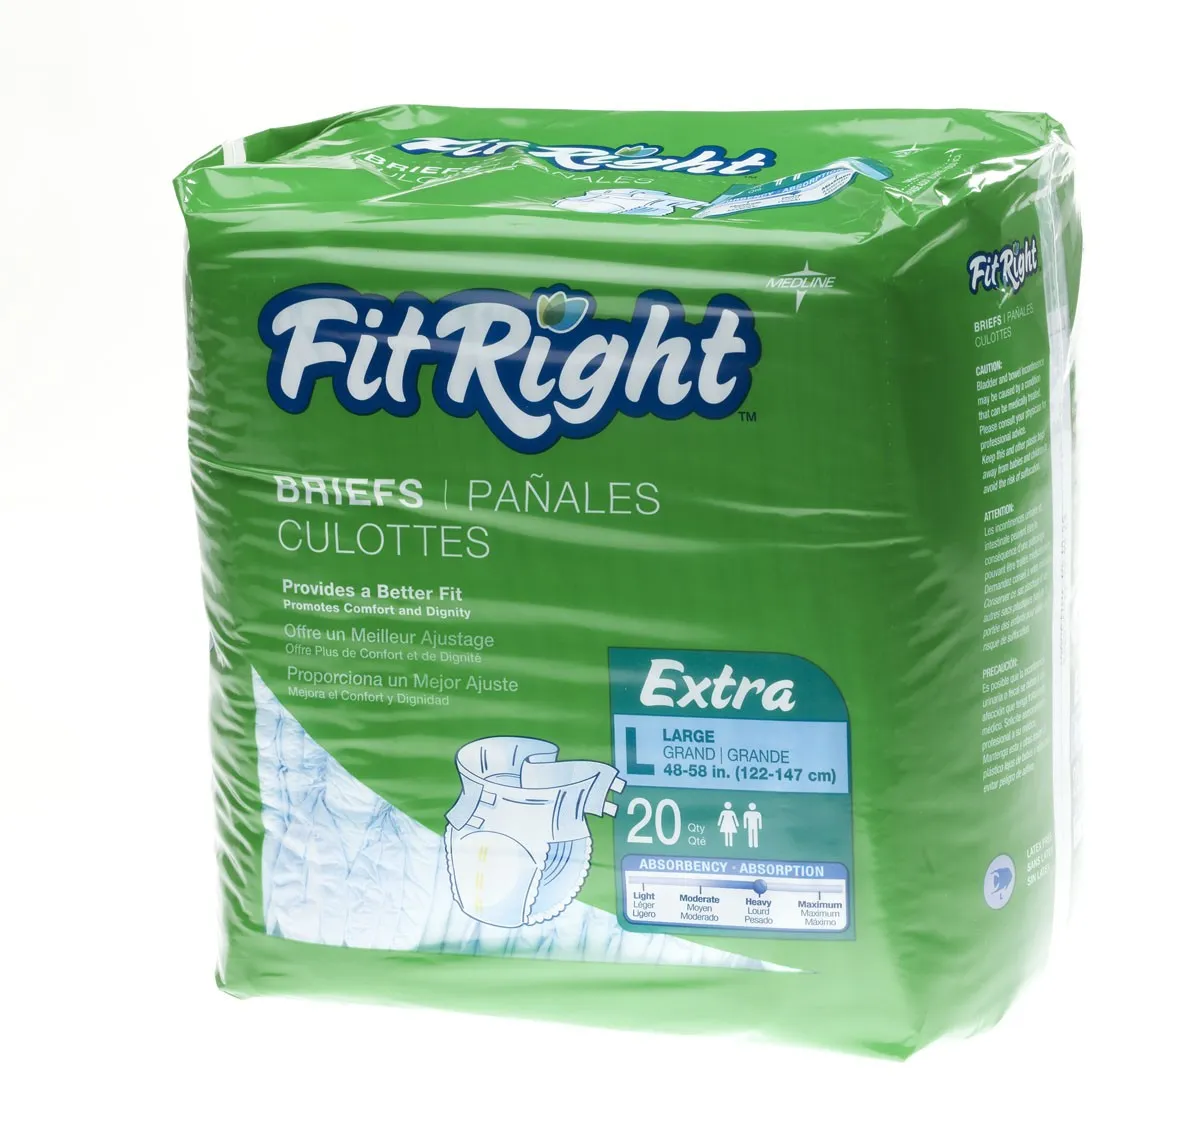 Medline From: FITEXTRALG To: FITEXTRAXXLZ - Fitright Extra Briefs